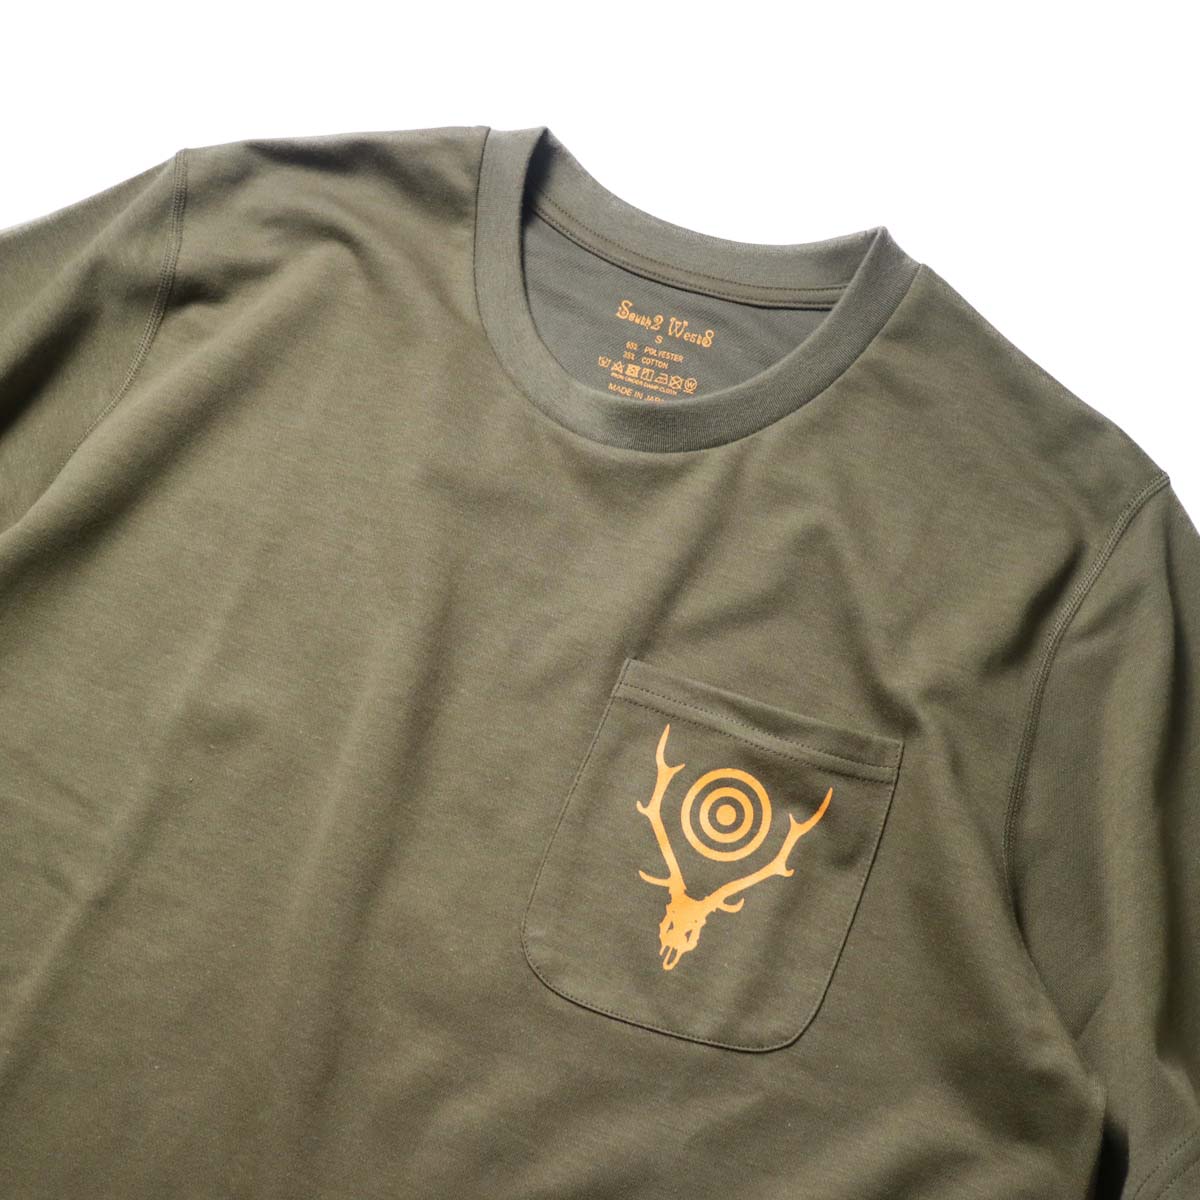 South2 West8 / S/S ROUND POCKET TEE - CIRCLE HORN (Olive)プリント